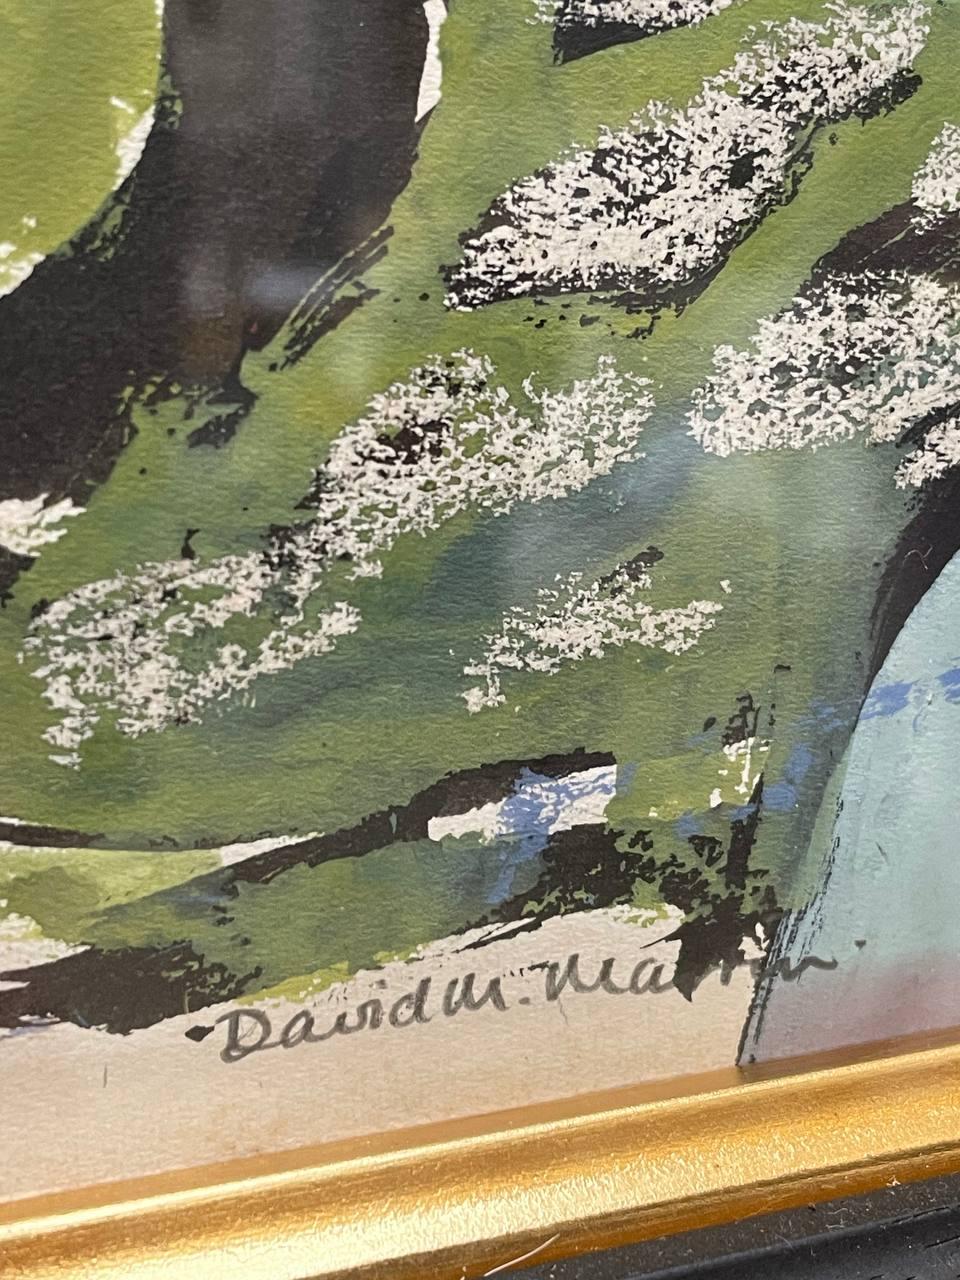 DAVID M MARTIN RSW RGI (1922-2018)
One of Scotland's finest 20th Century still life and landscape painters. He studied at Glasgow School of Art and also trained in textile design, which influenced his painting style. His work was exhibited at the